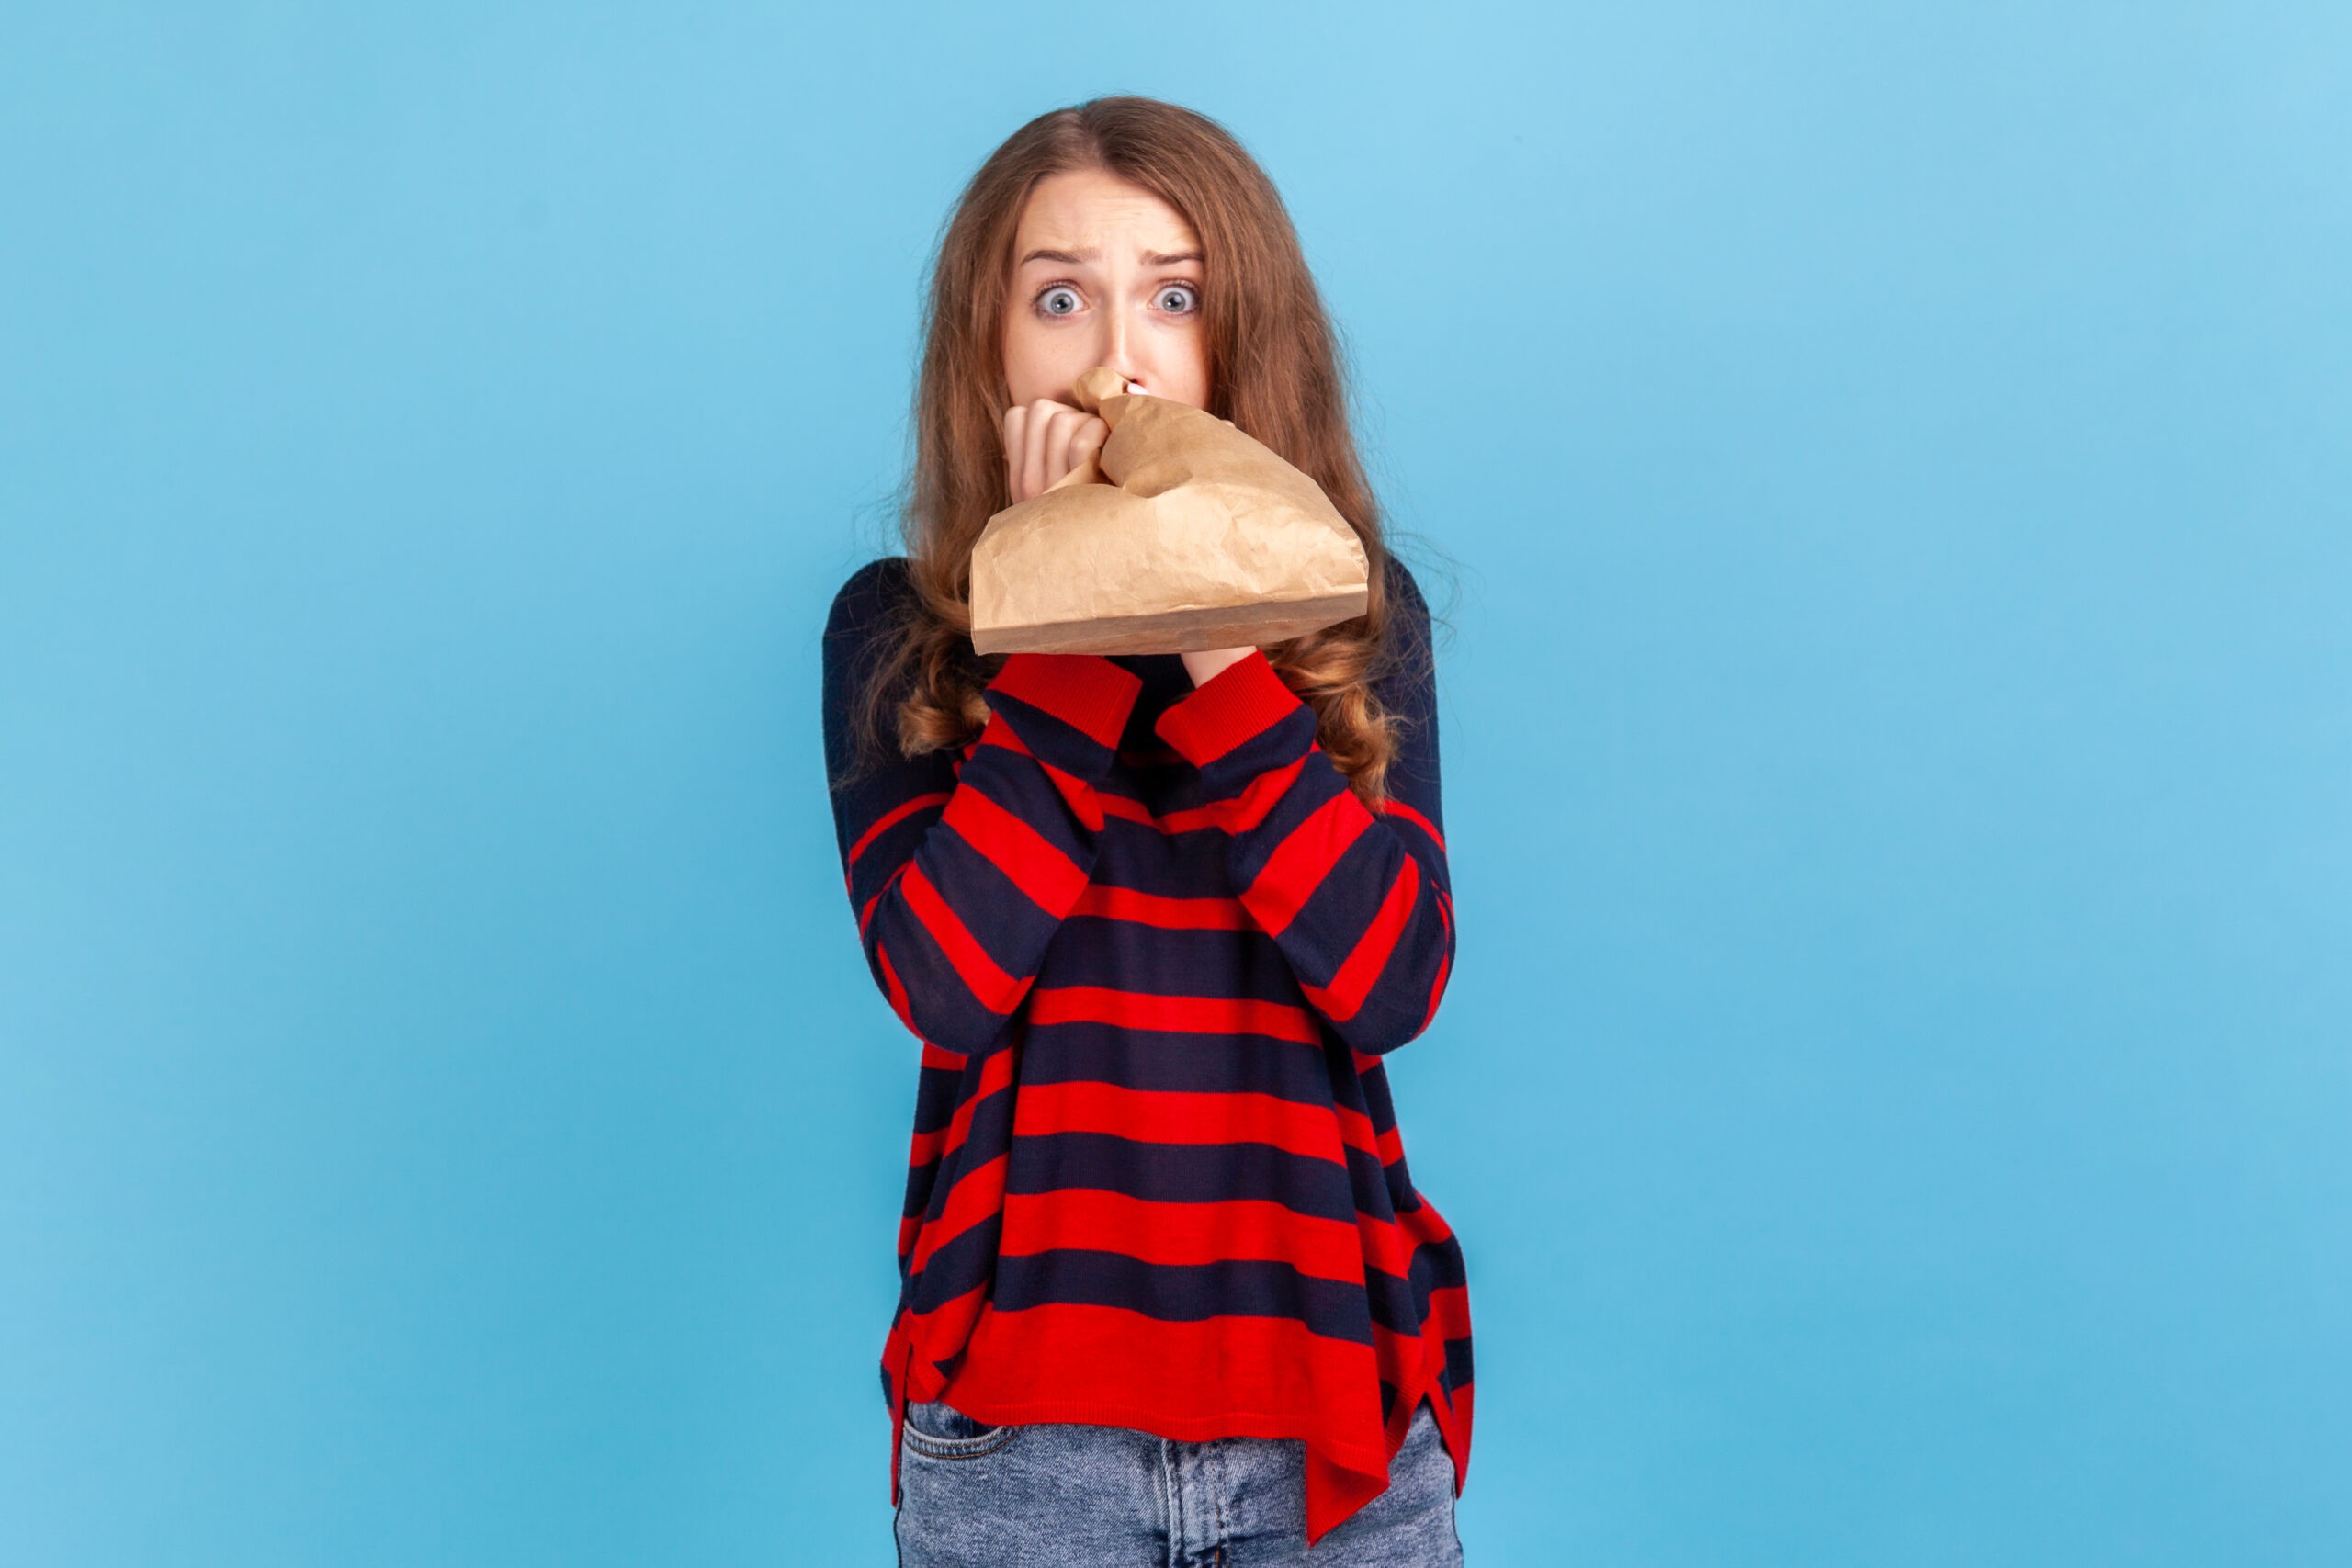 Woman breathing into paper bag to improve well-being, overcoming stress, looking at camera with fear